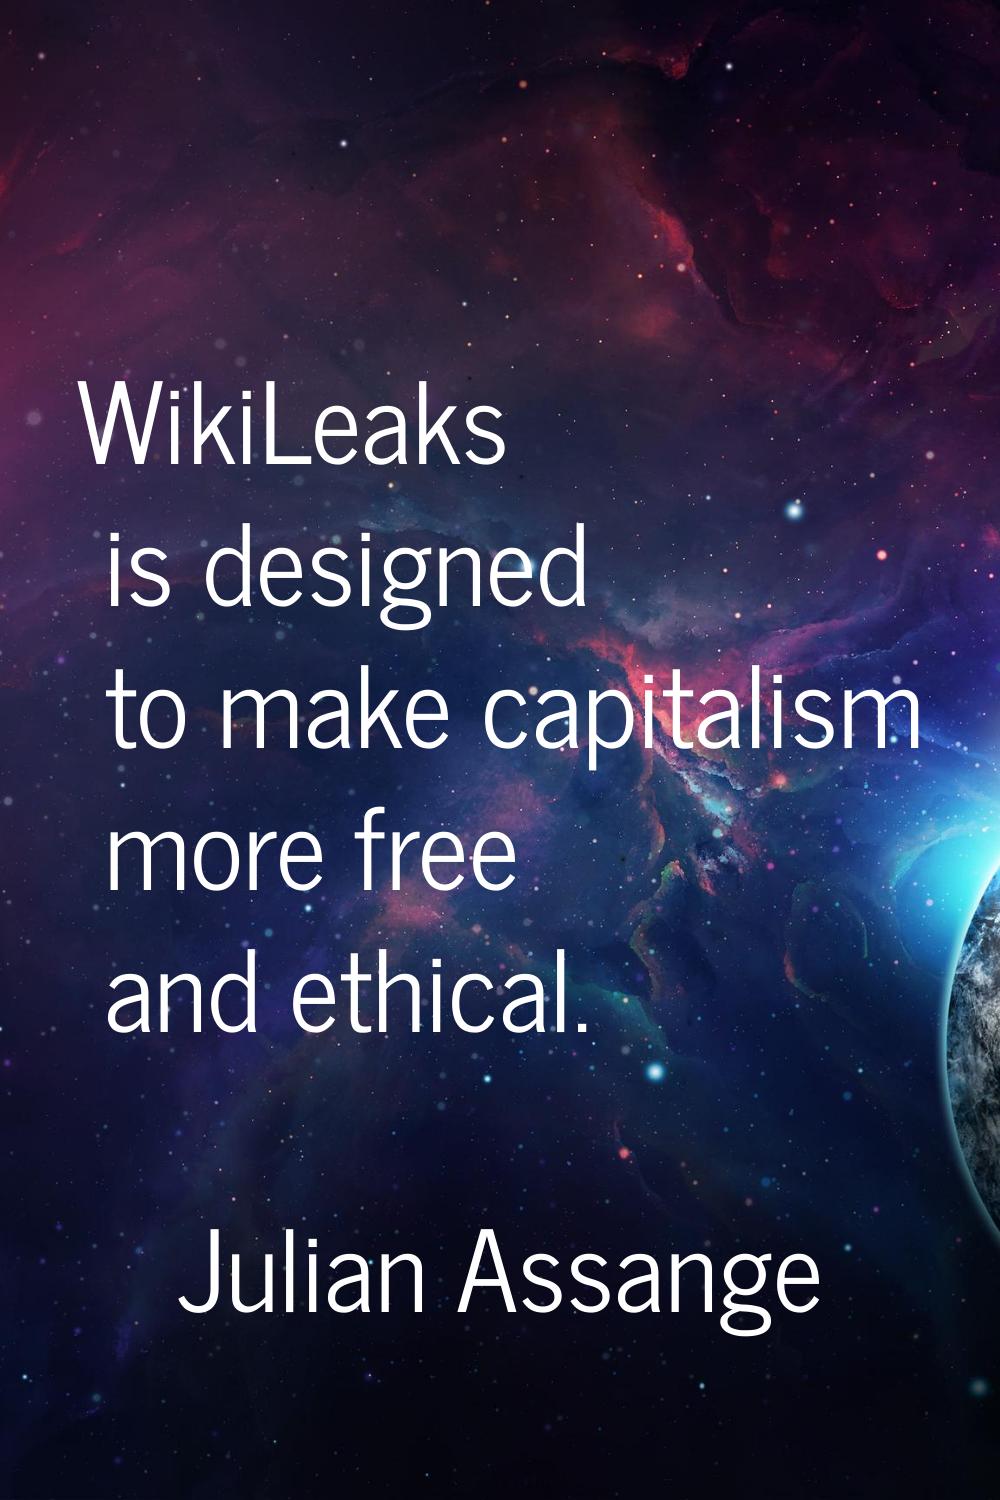 WikiLeaks is designed to make capitalism more free and ethical.